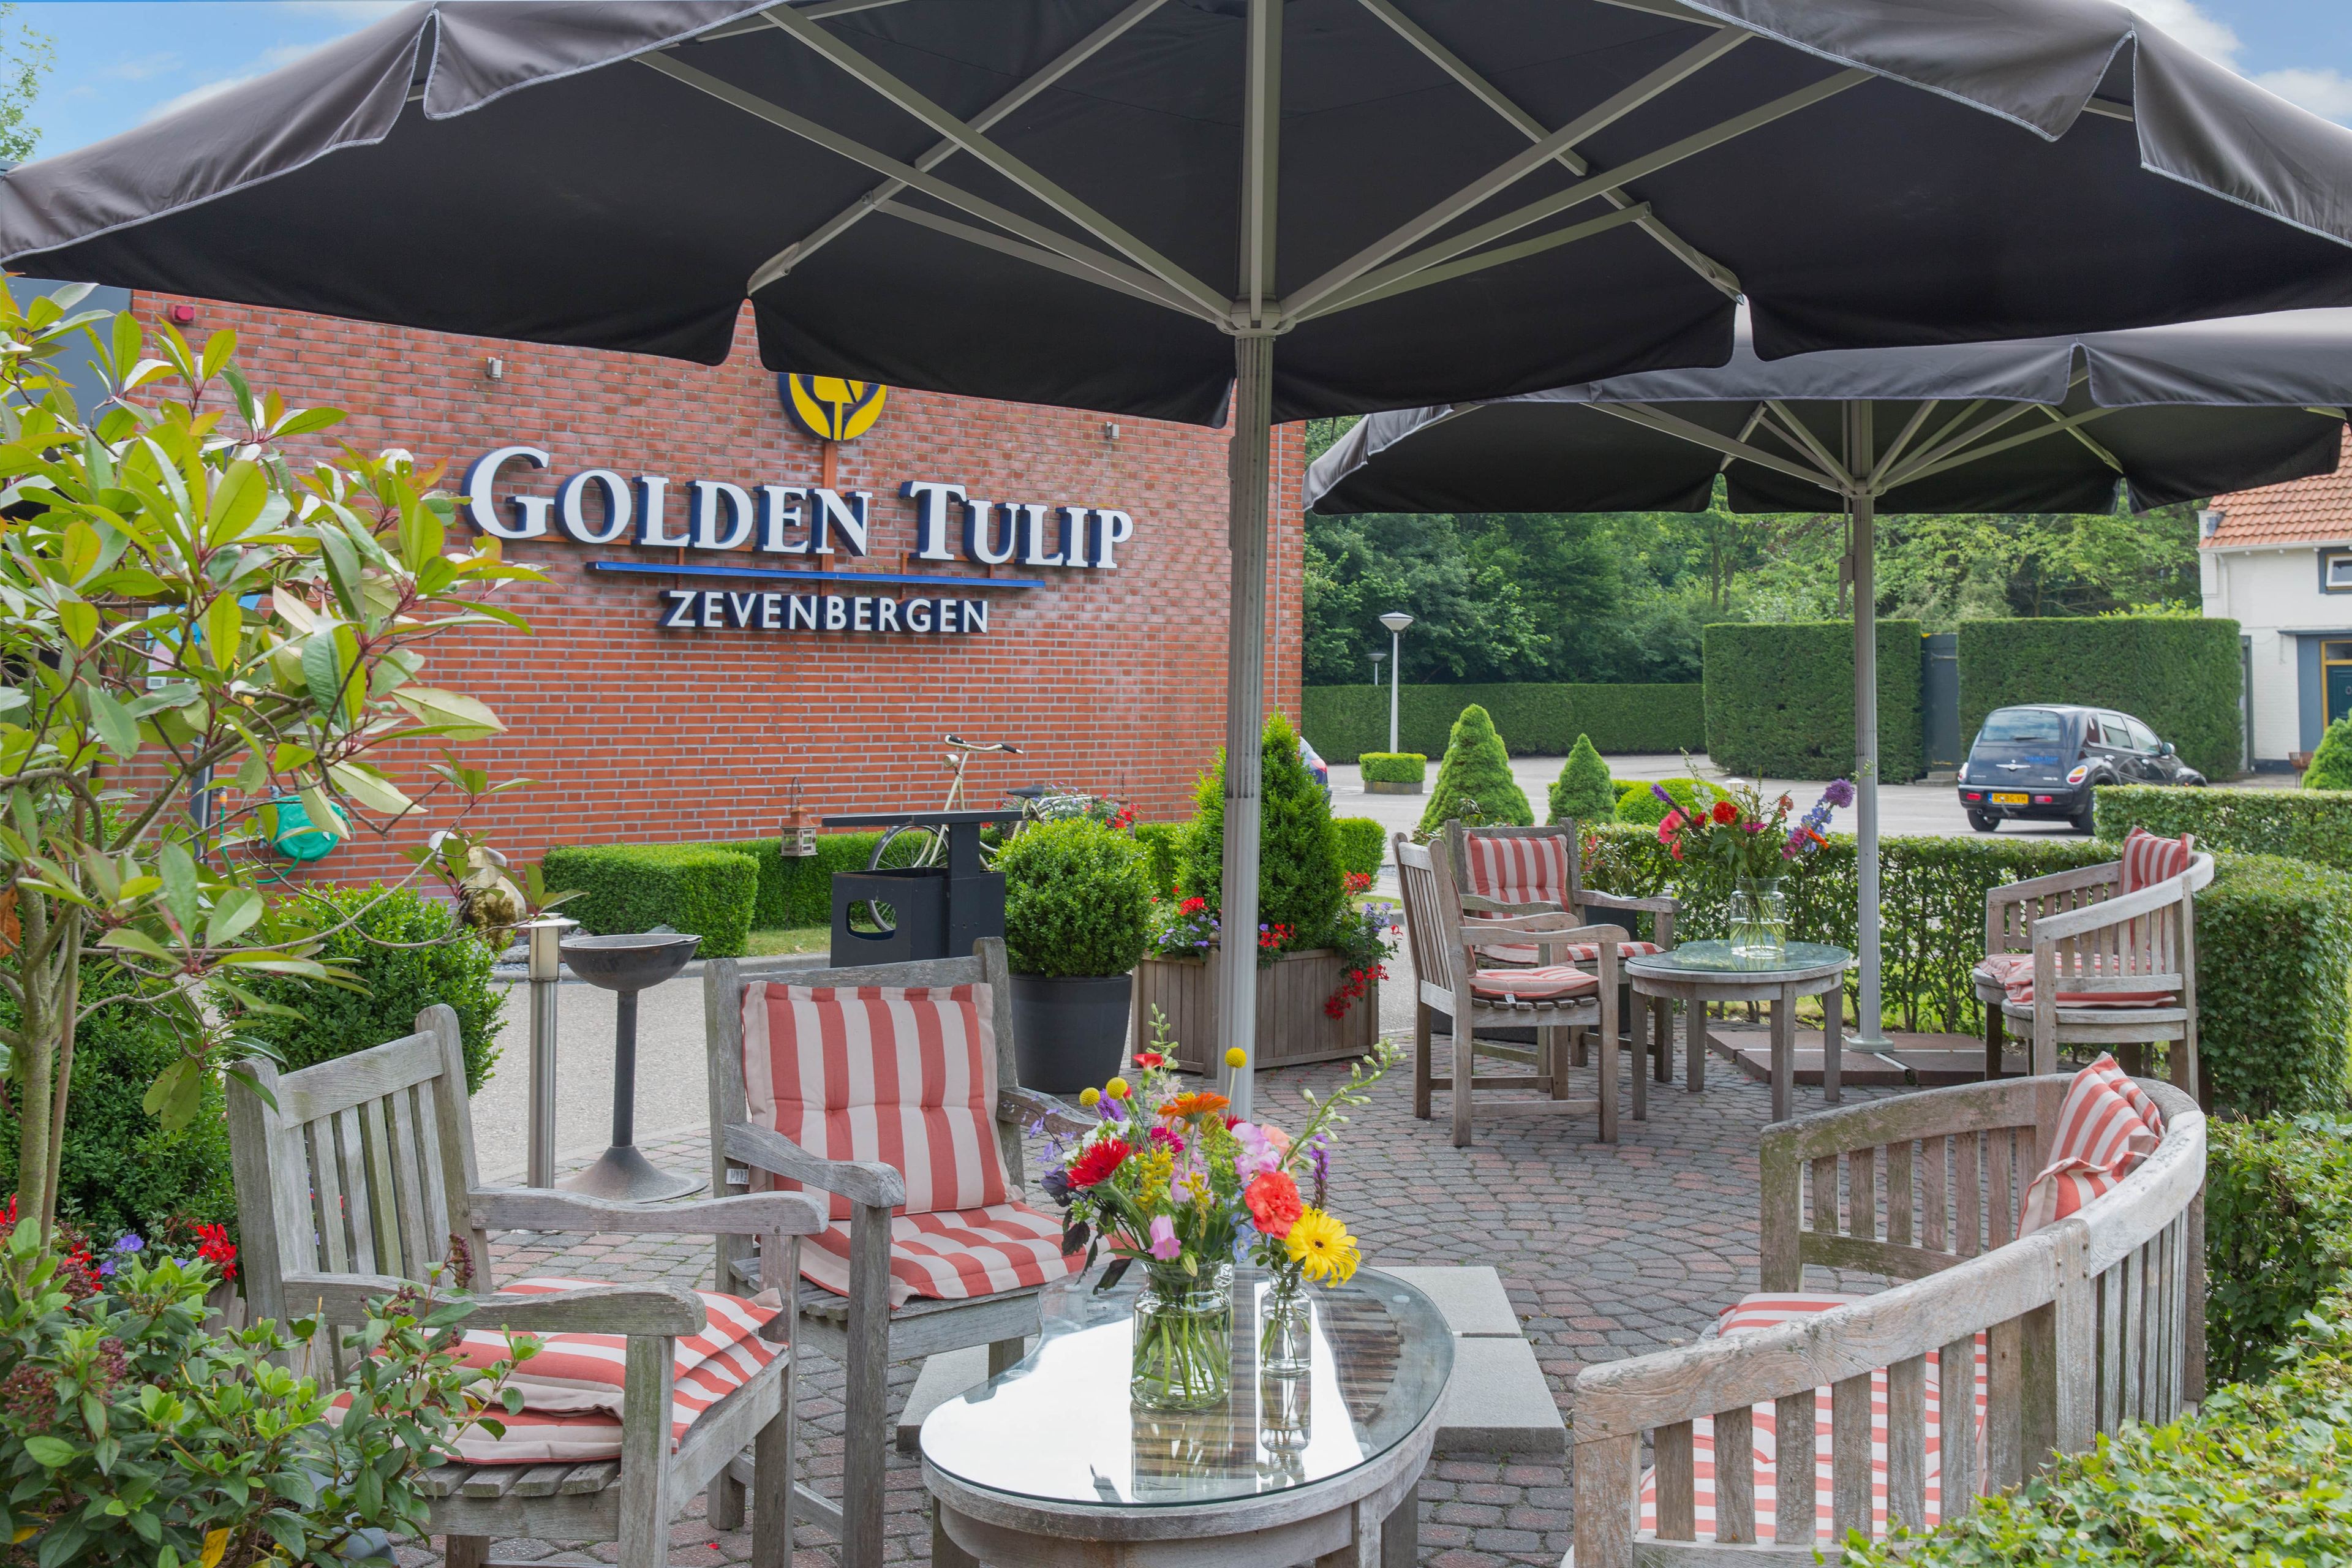 Golden Tulip Hotel Zevenbergen <br/>99.00 ew <br/> <a href='http://vakantieoplossing.nl/outpage/?id=67e42514c7776591f6c20599f12a298d' target='_blank'>View Details</a>